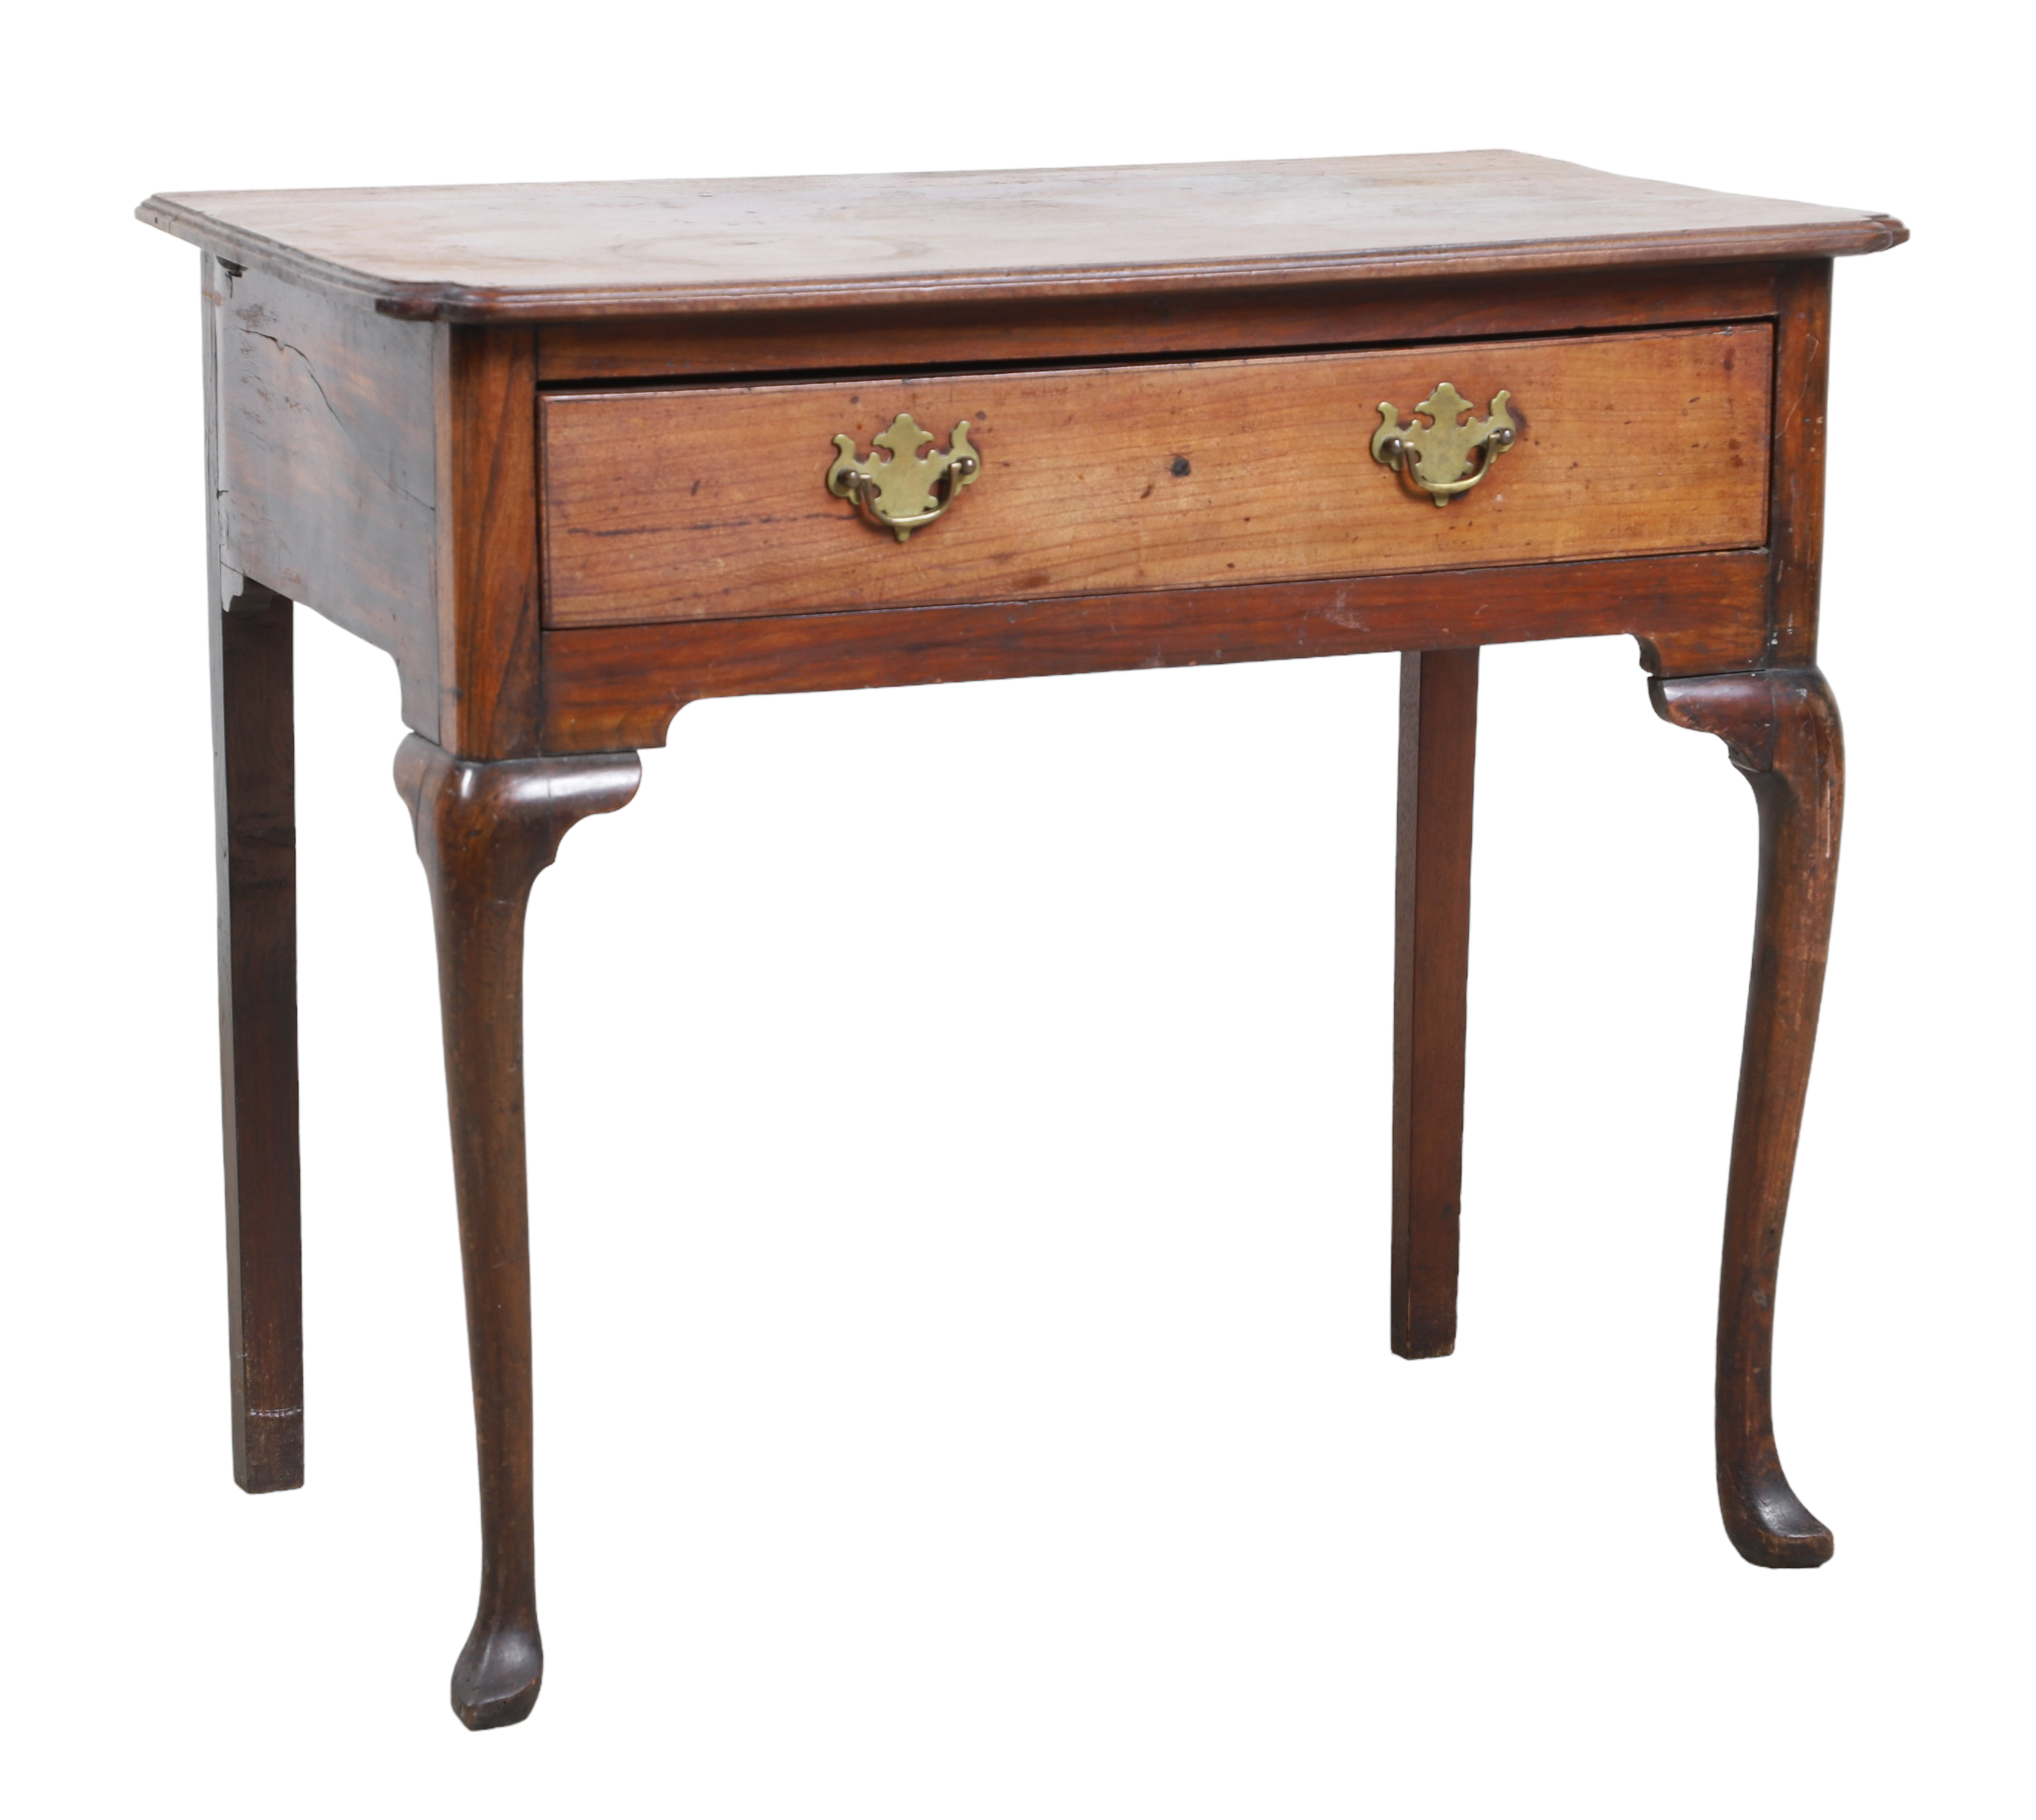 Cherry Queen Anne dressing table